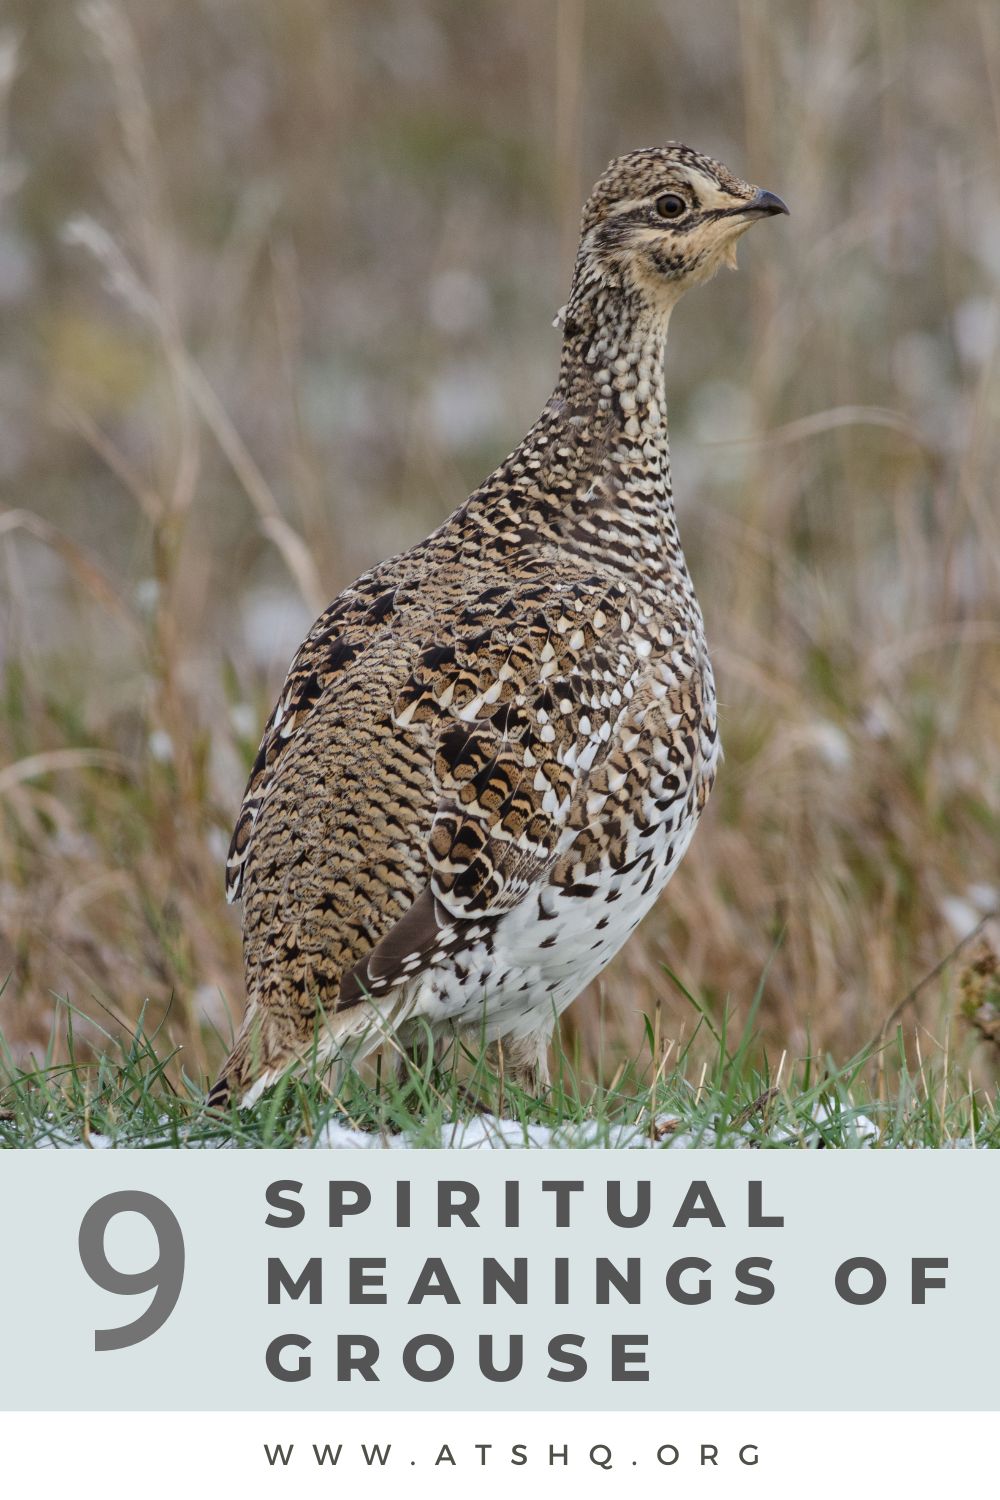 Grouse Symbolism: 9 Spiritual Meanings of Grouse